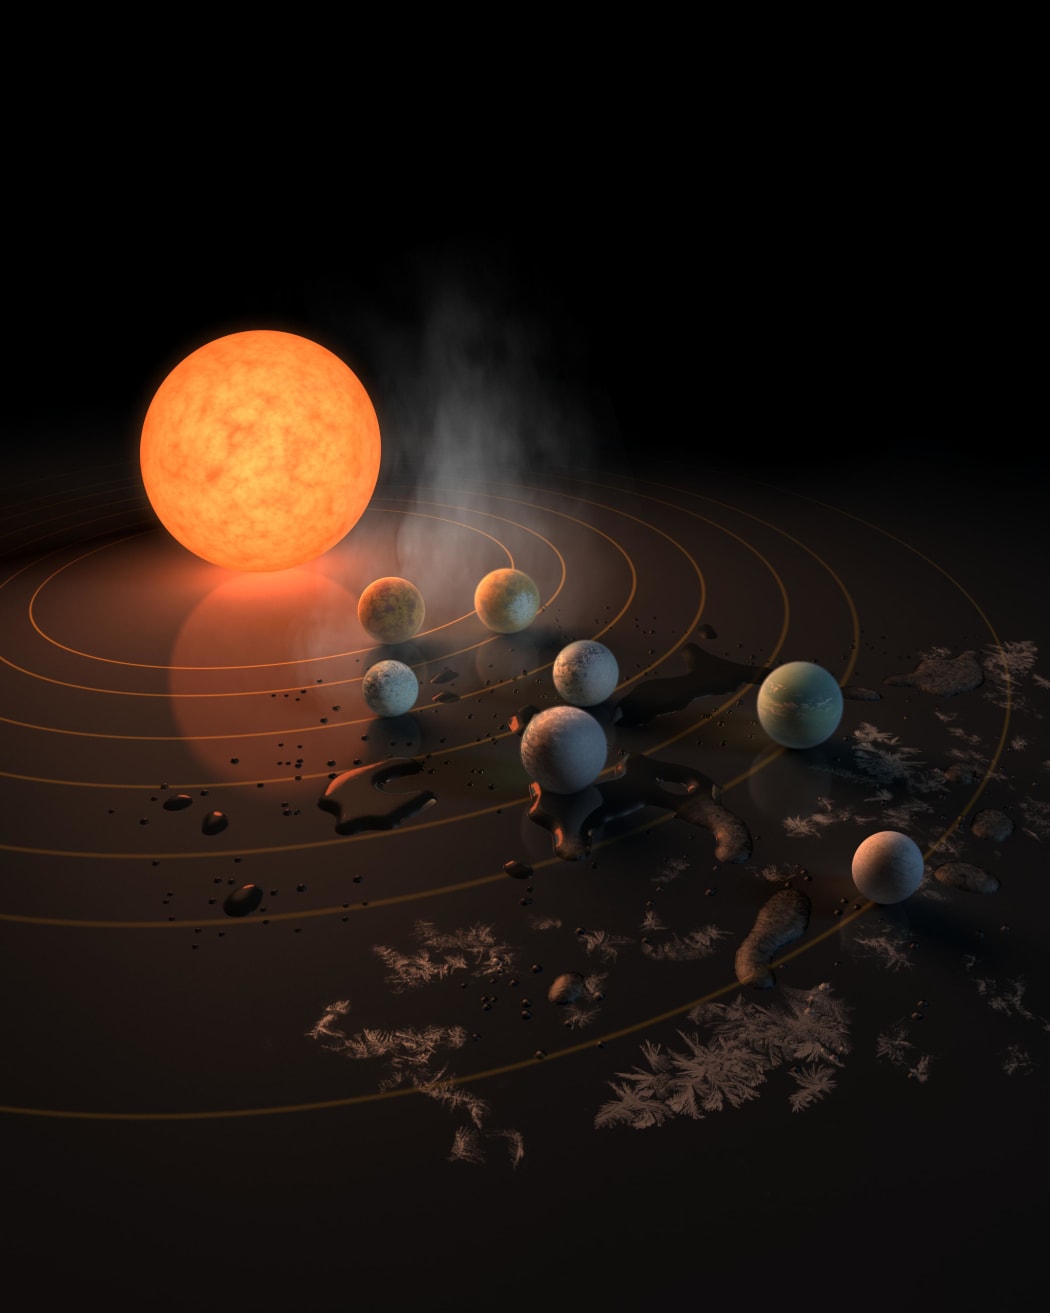 Seven Earth-sized planets have been discovered orbiting a nearby star known as TRAPPIST-1. At least three may be in the habitable zone.